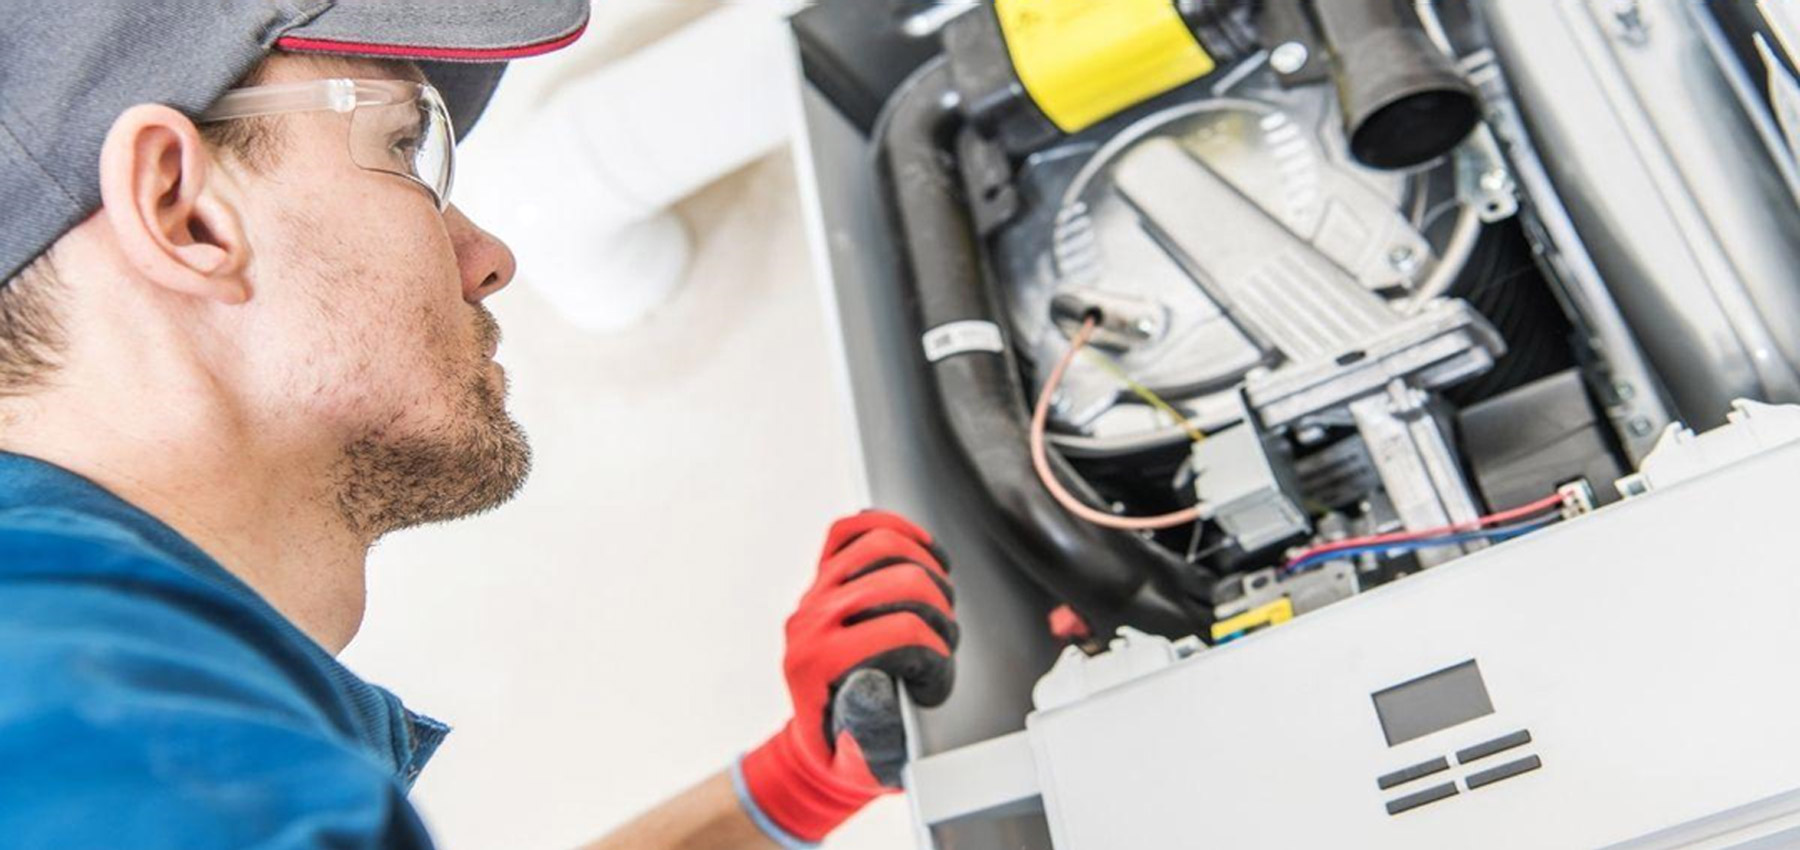 When You Should Get an HVAC Inspection?